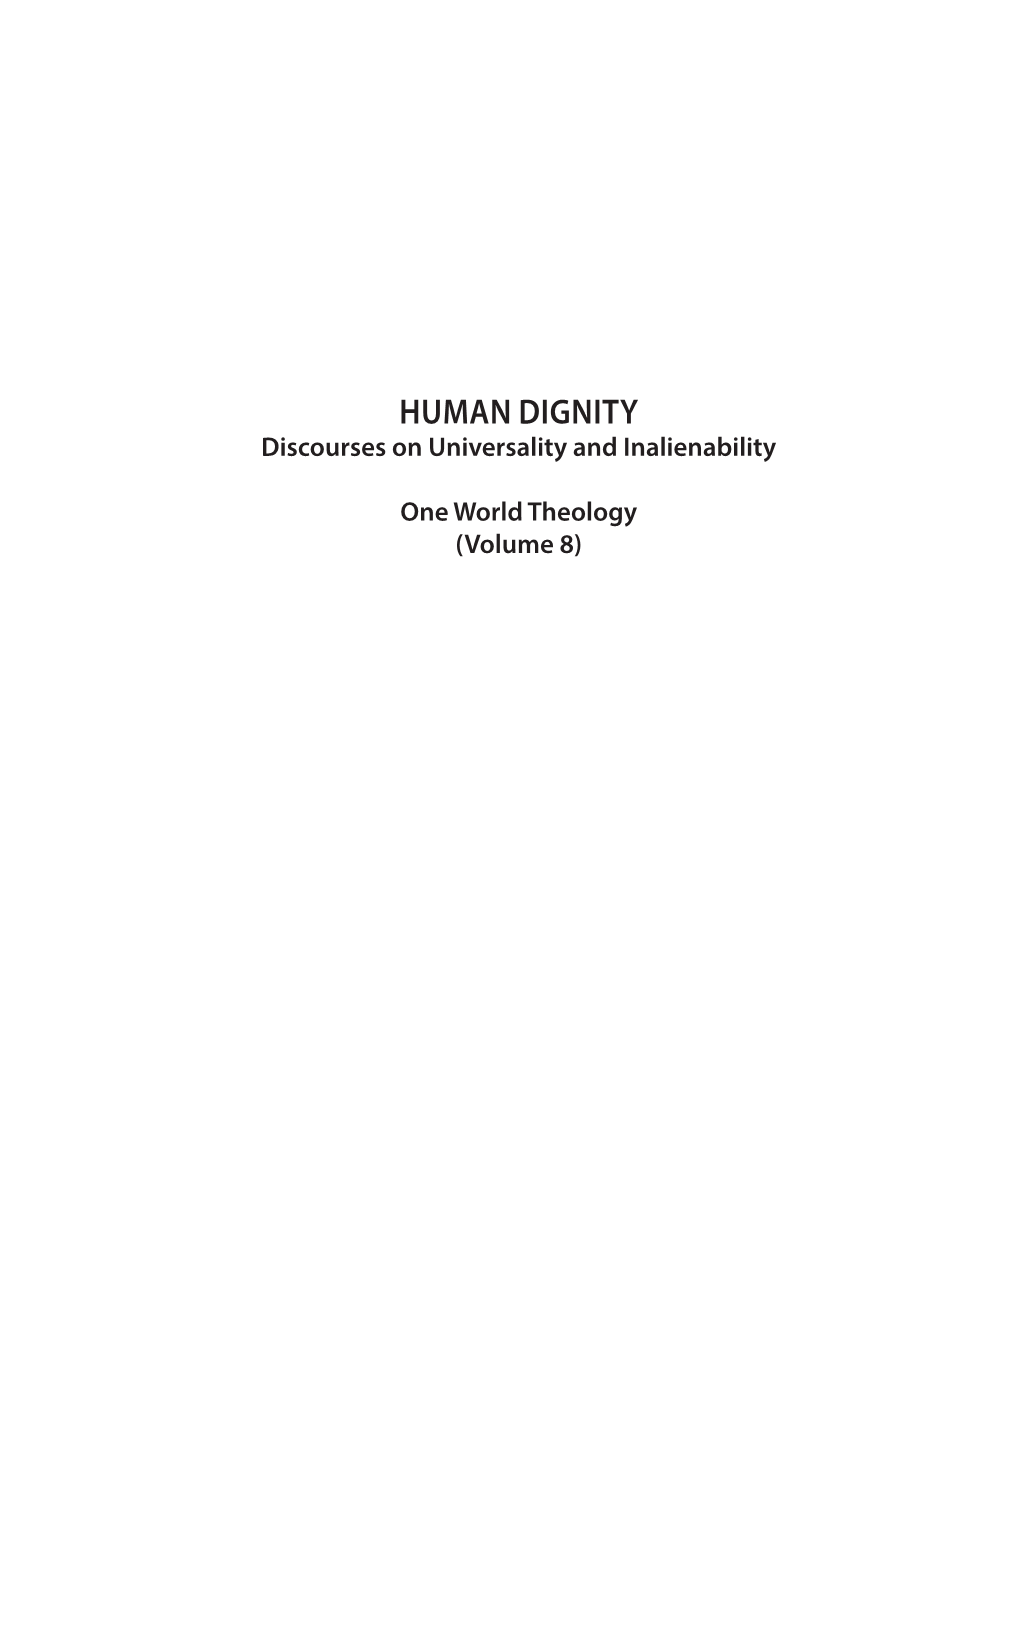 HUMAN DIGNITY Discourses on Universality and Inalienability